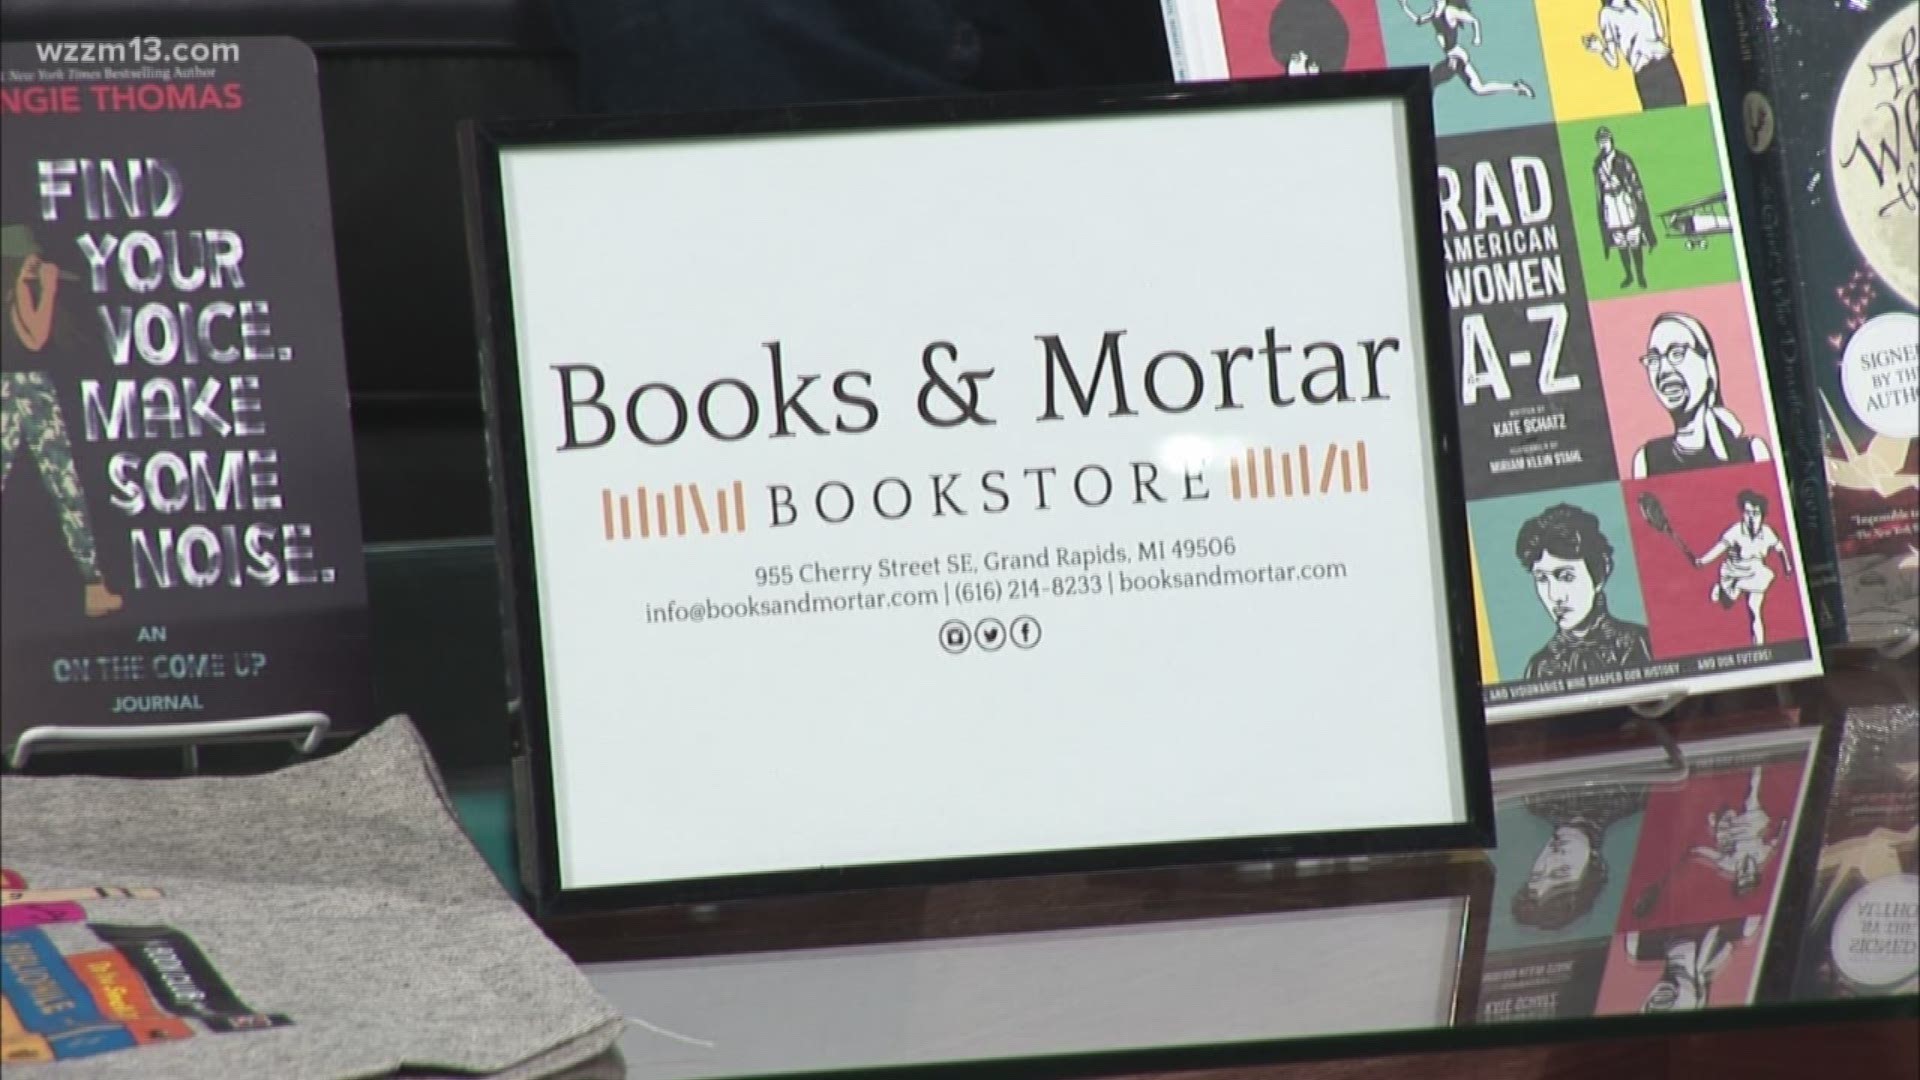 Saturday, April 27th is Indie Bookstore Day. It's a national event that celebrates the contributions of independent bookstores to their communities. Books & Mortar is celebrating at their downtown Grand Rapids location all day.